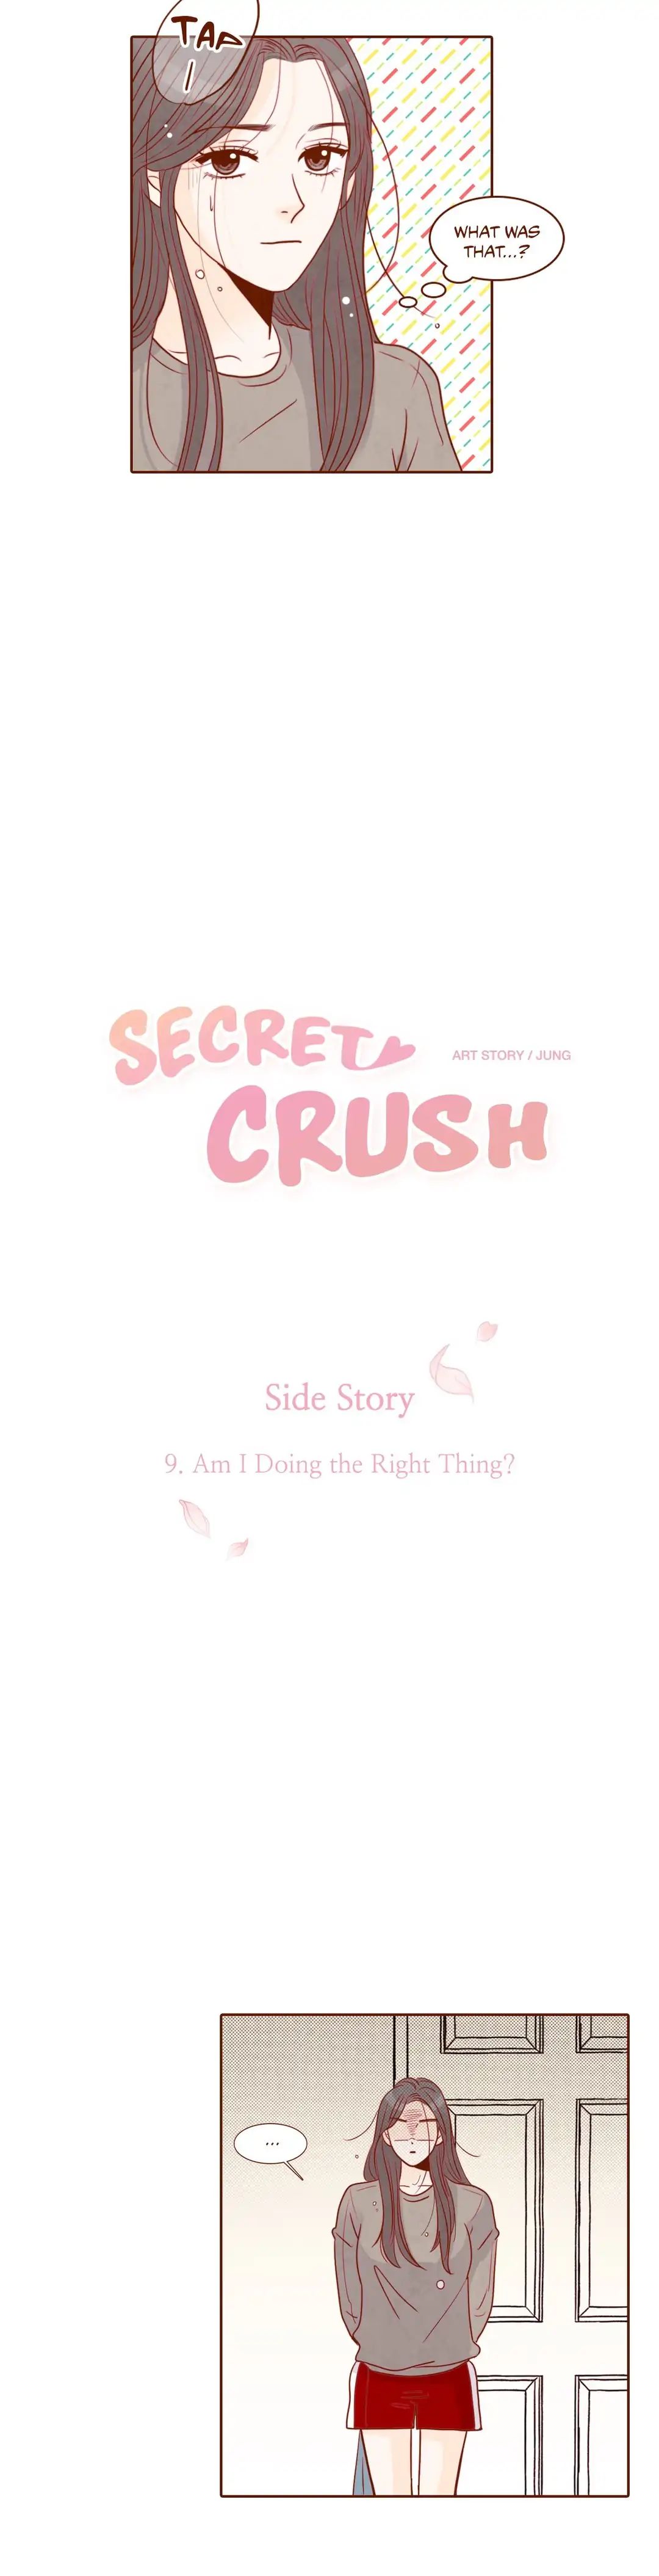 Secret Crush Side Story: Am I Doing The Right Thing? - Picture 3